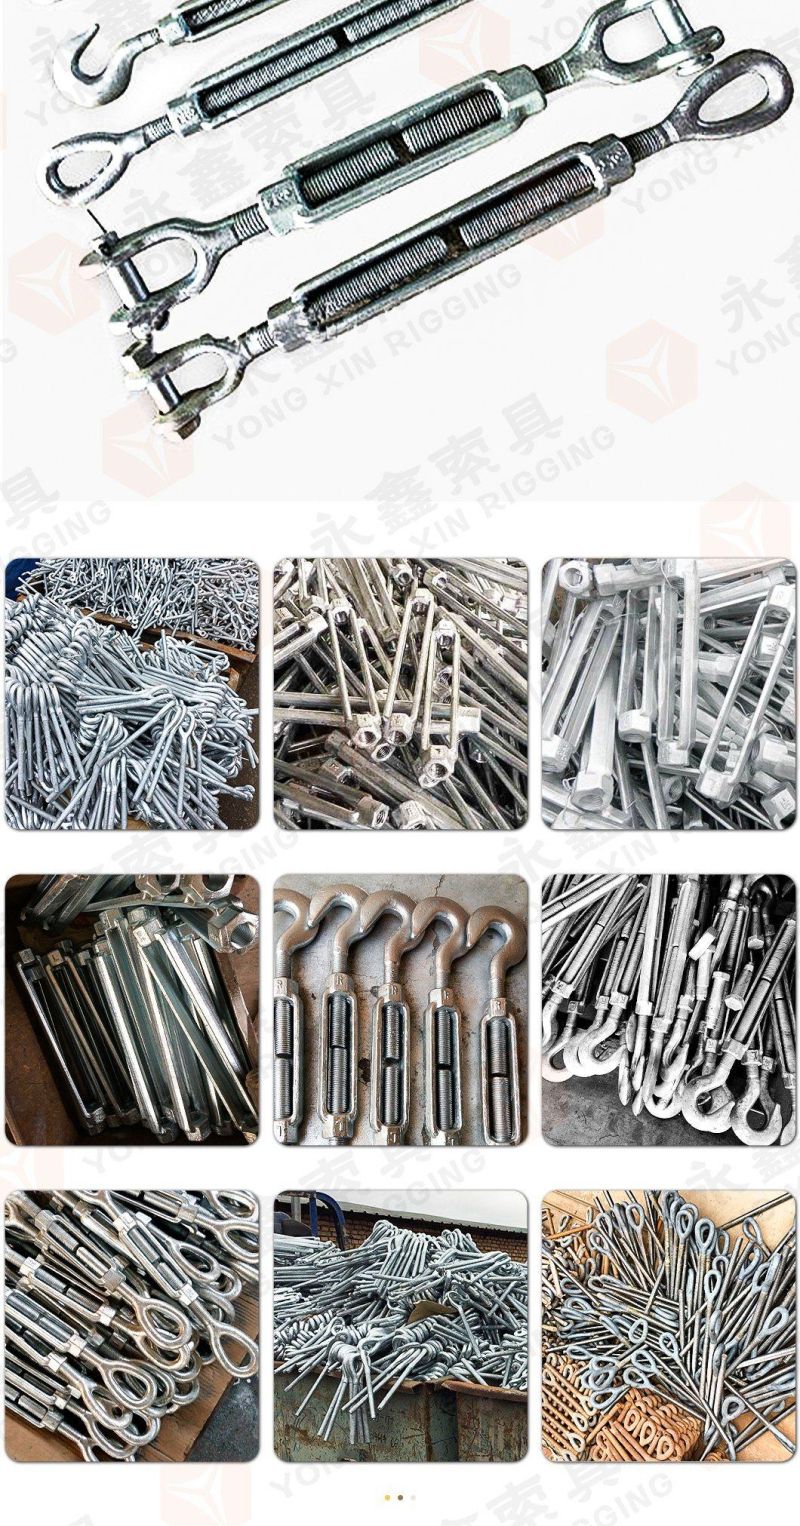 European Type Electro Galvanized DIN 1480 Turnbuckle with Hook and Eye